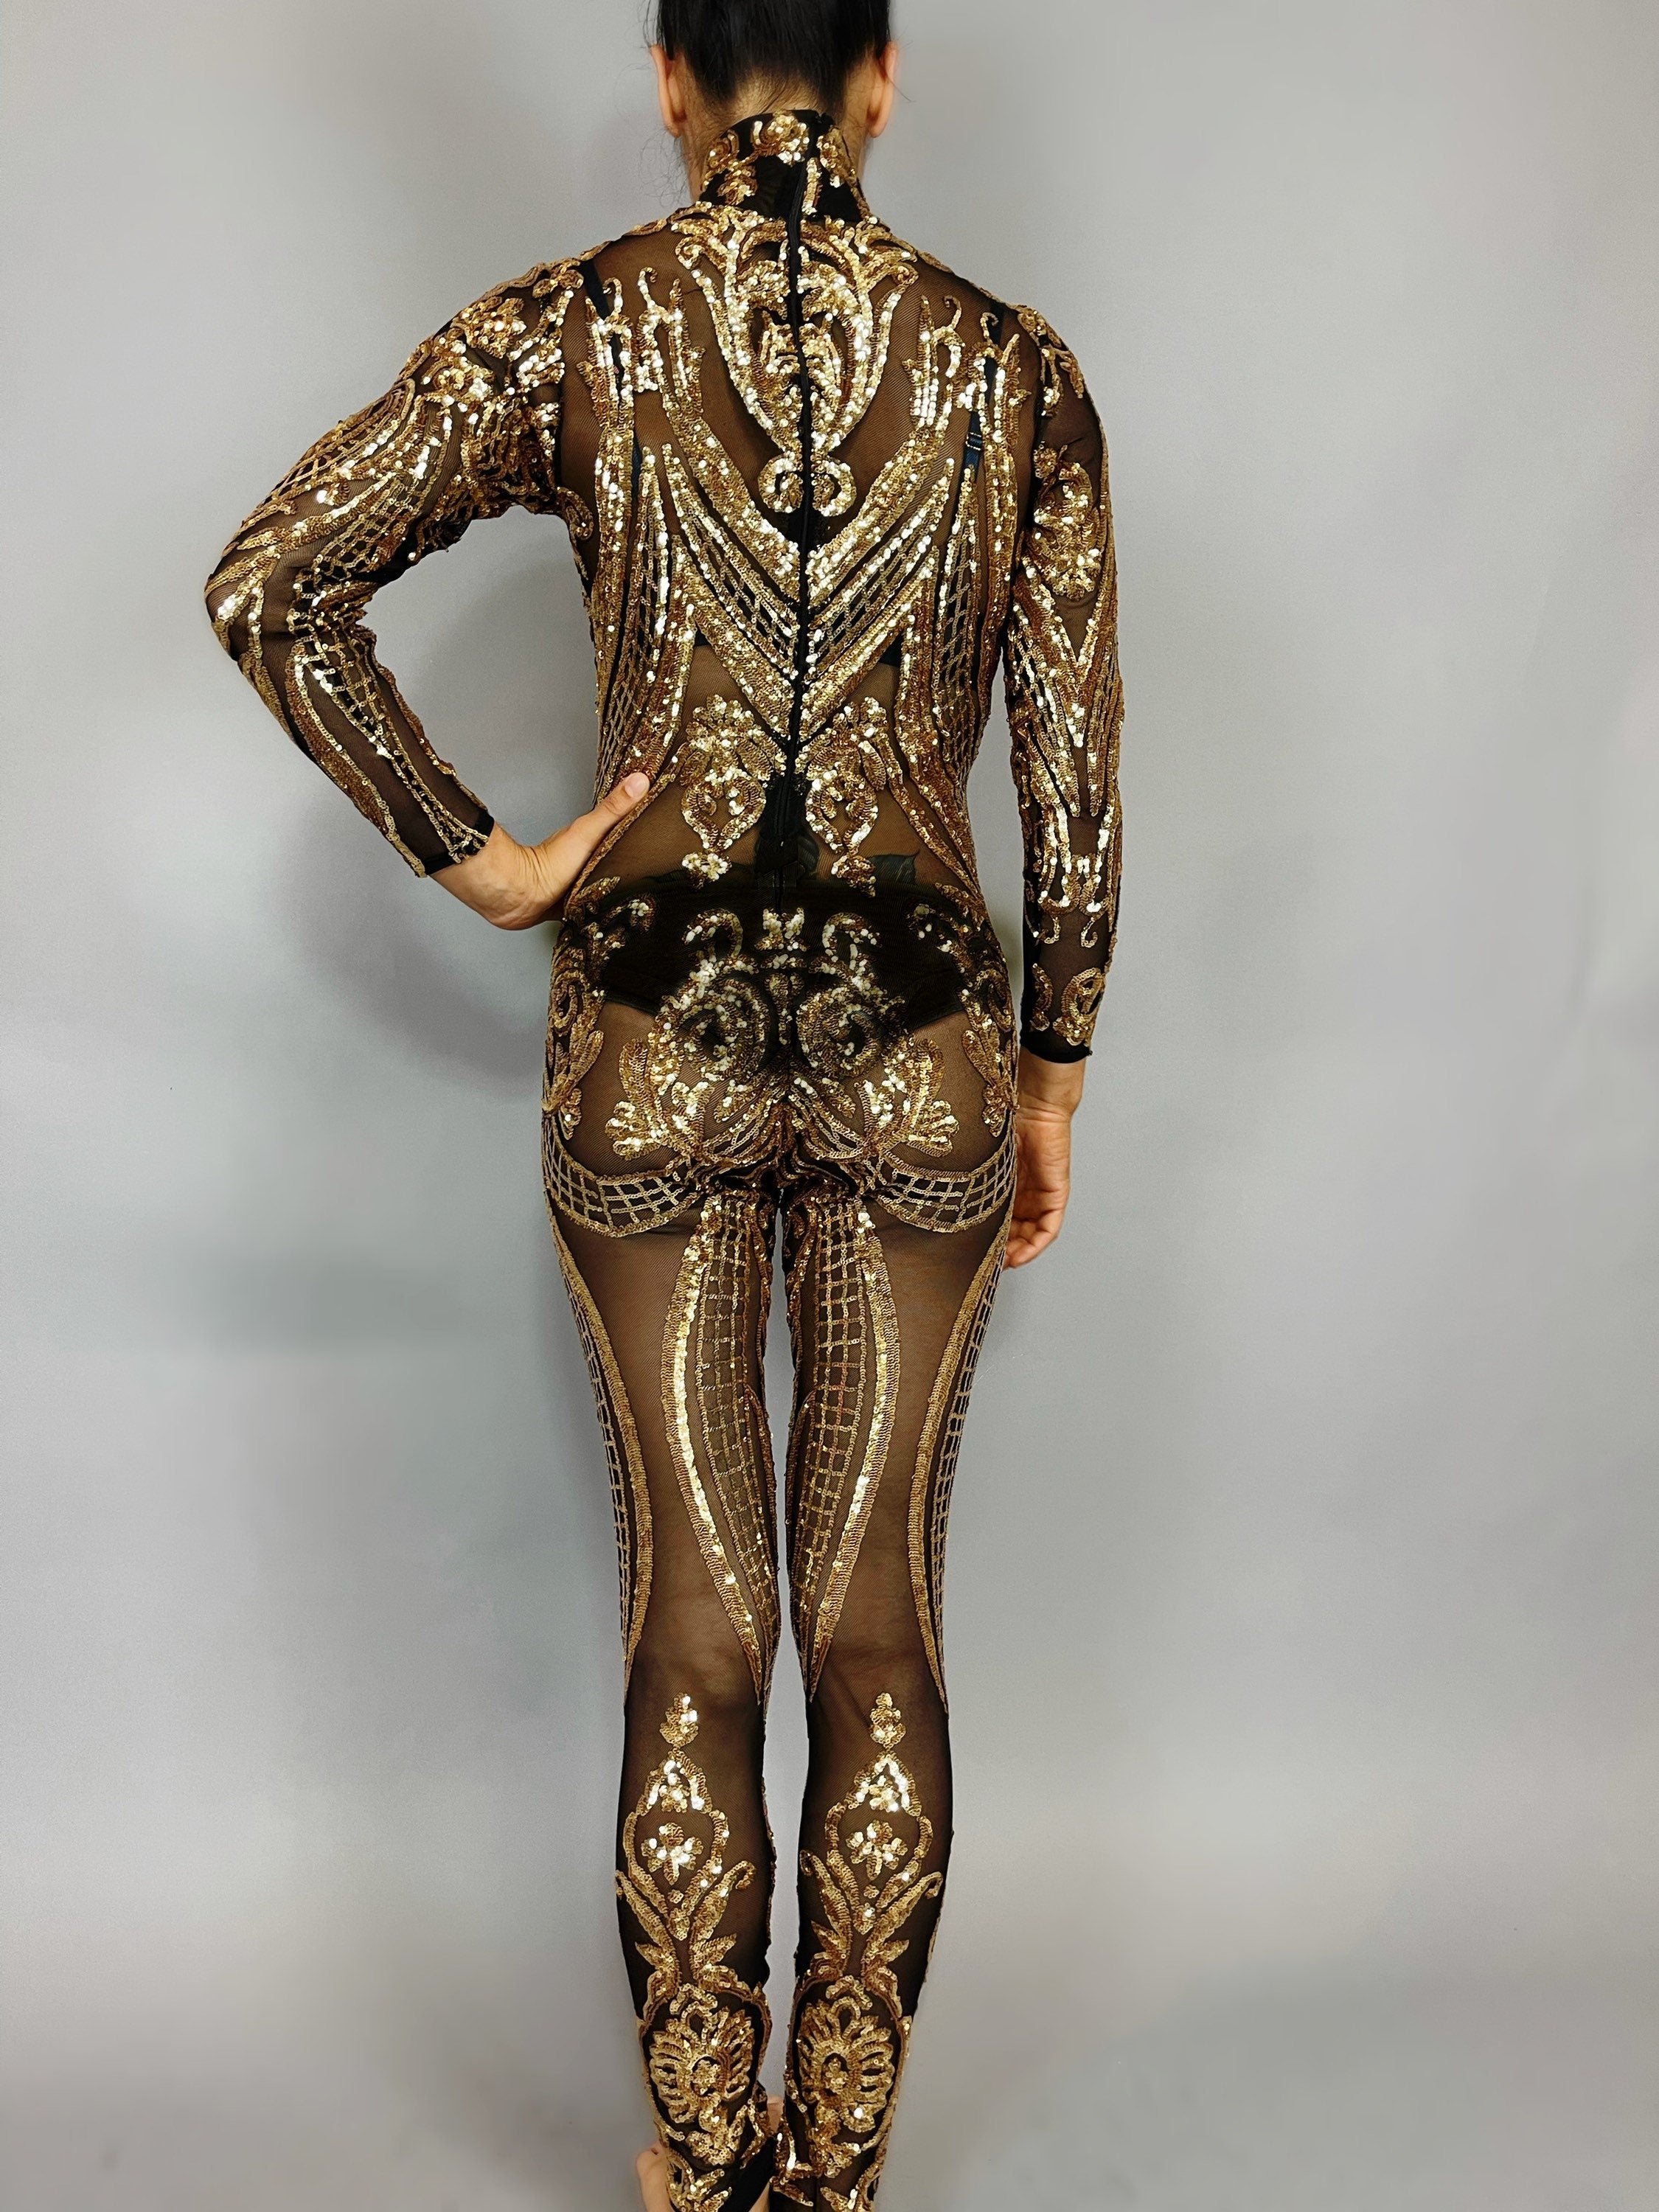 Gold Sequins Catsuit, Contortionist Costume, Elegant Sexy Fashion for Dancers, Circus Performers, Party Outfit, Stage Clothing